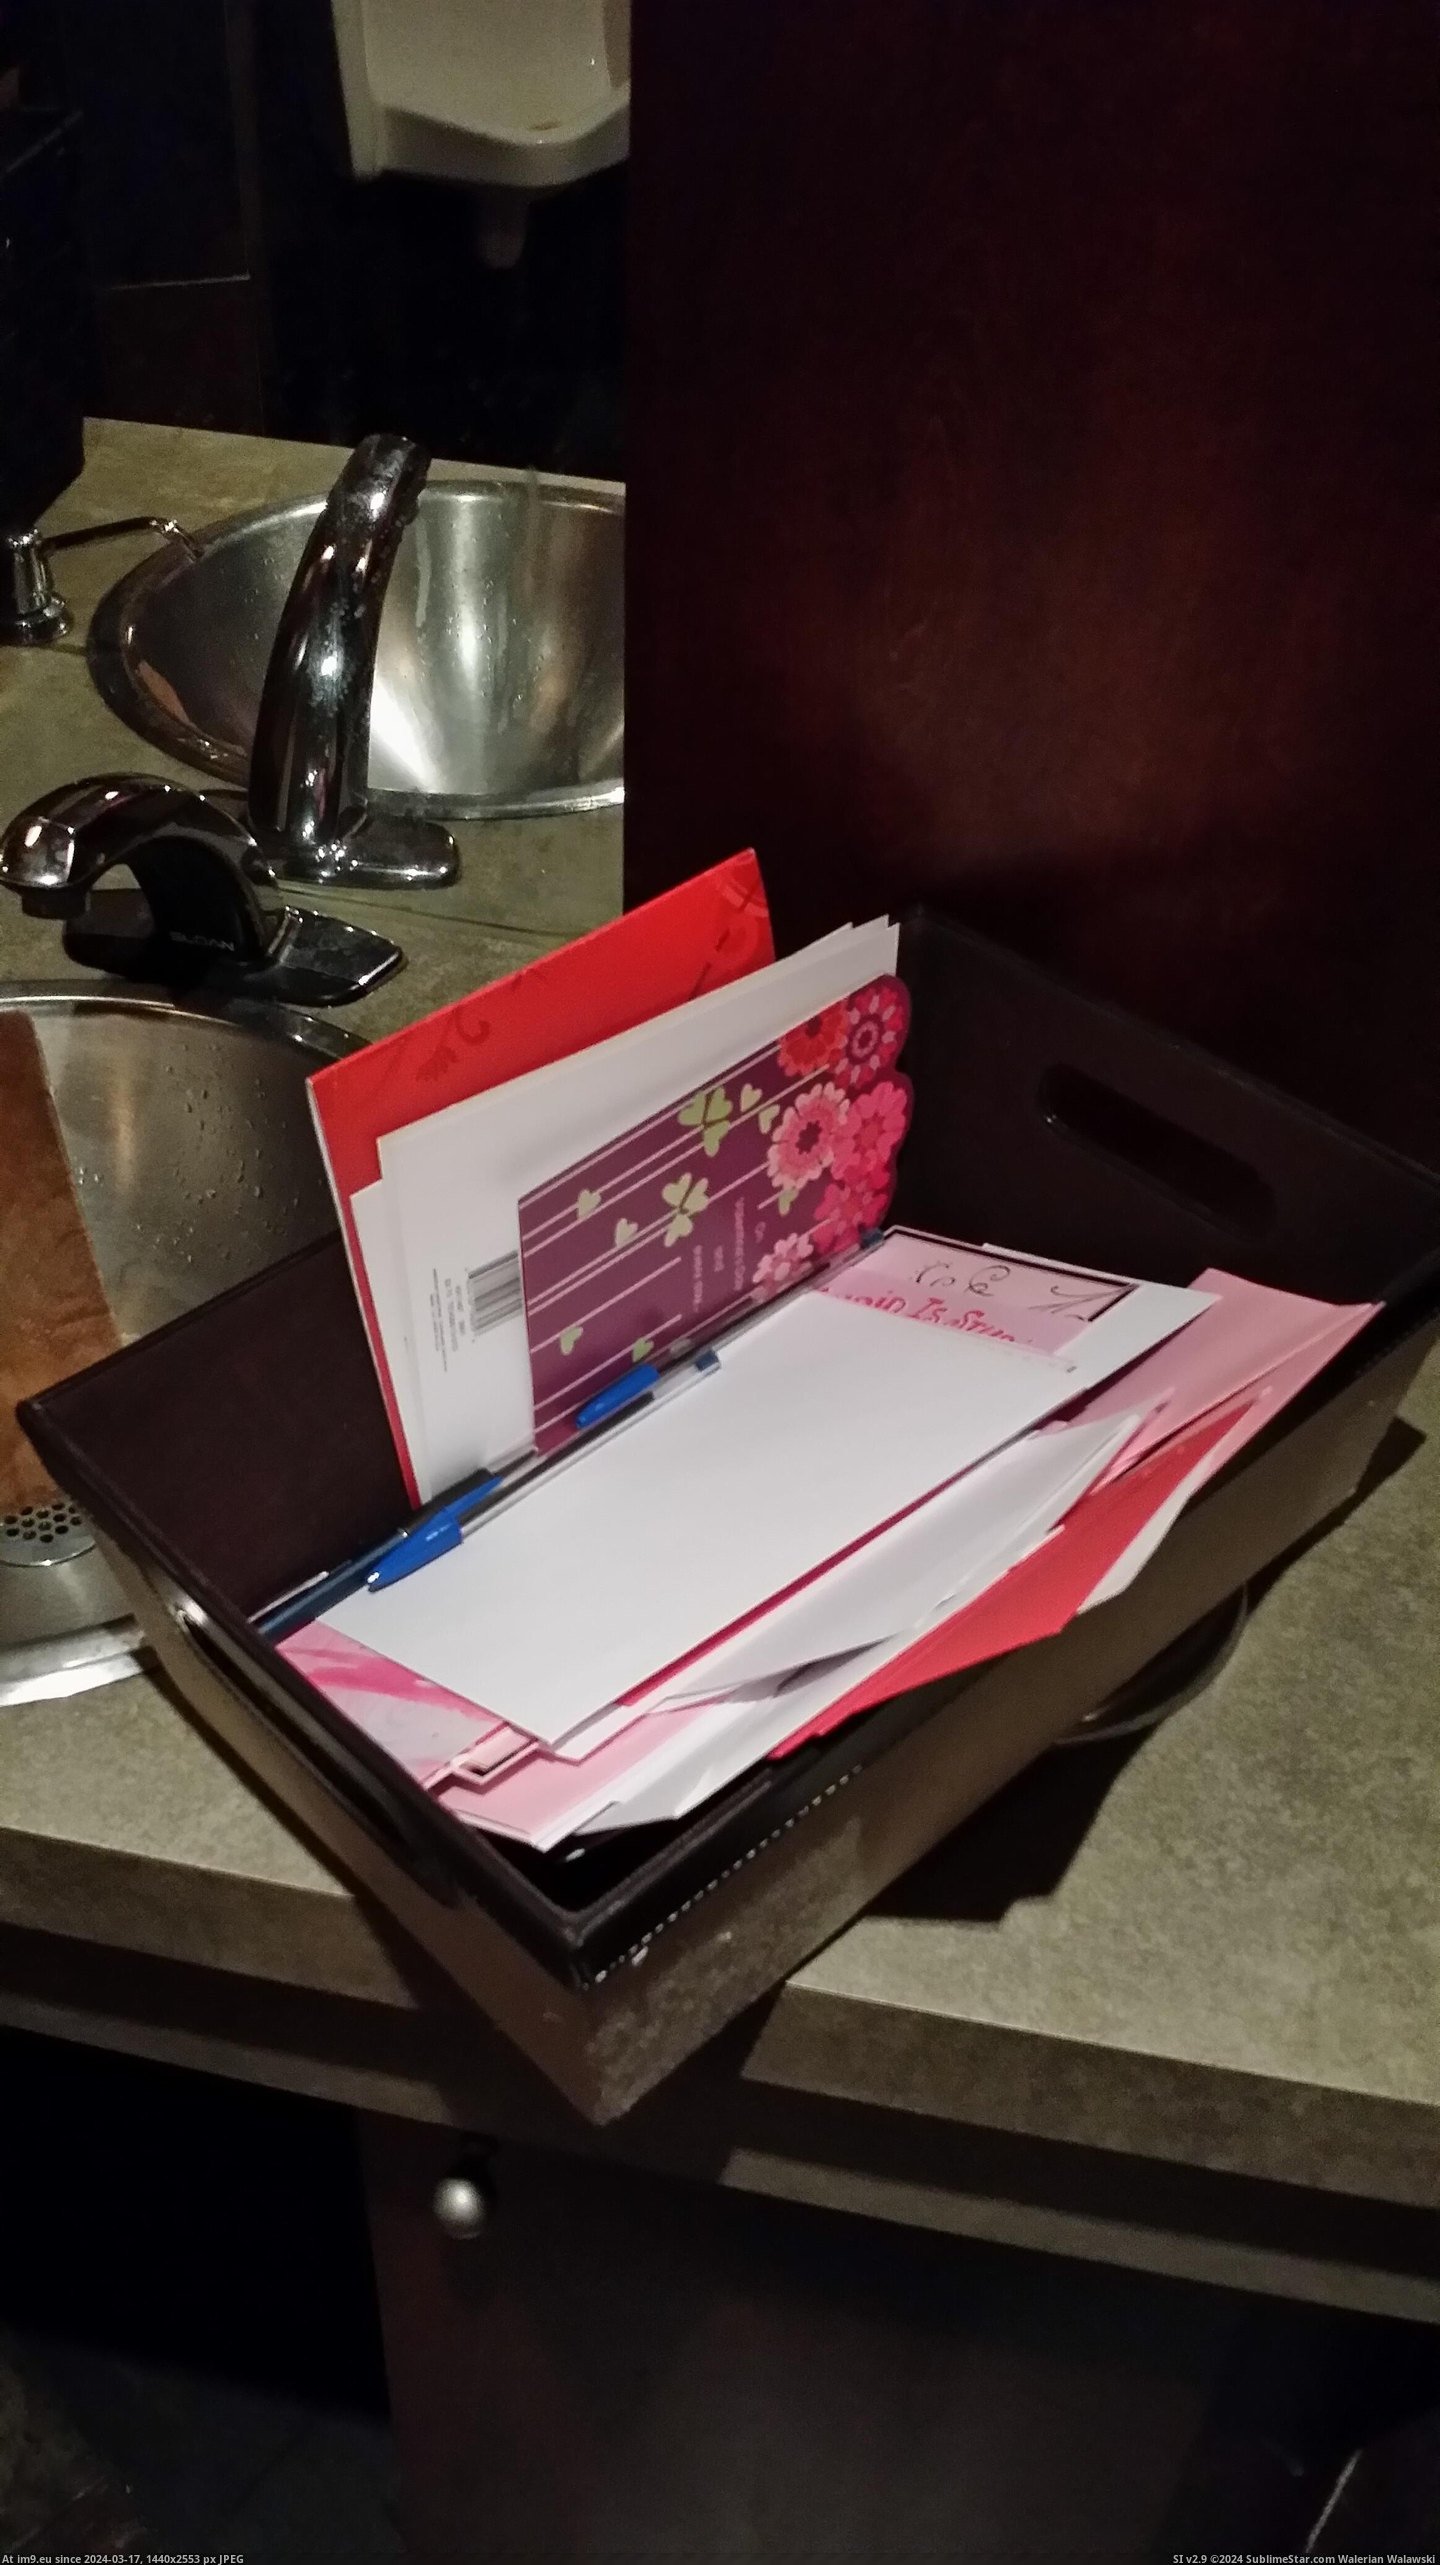 #Day #Restaurant #Valentines #Props #Washroom #Cards #Clever [Pics] Props to this restaurant for having blank valentines day cards in the washroom. Very, very clever Pic. (Bild von album My r/PICS favs))